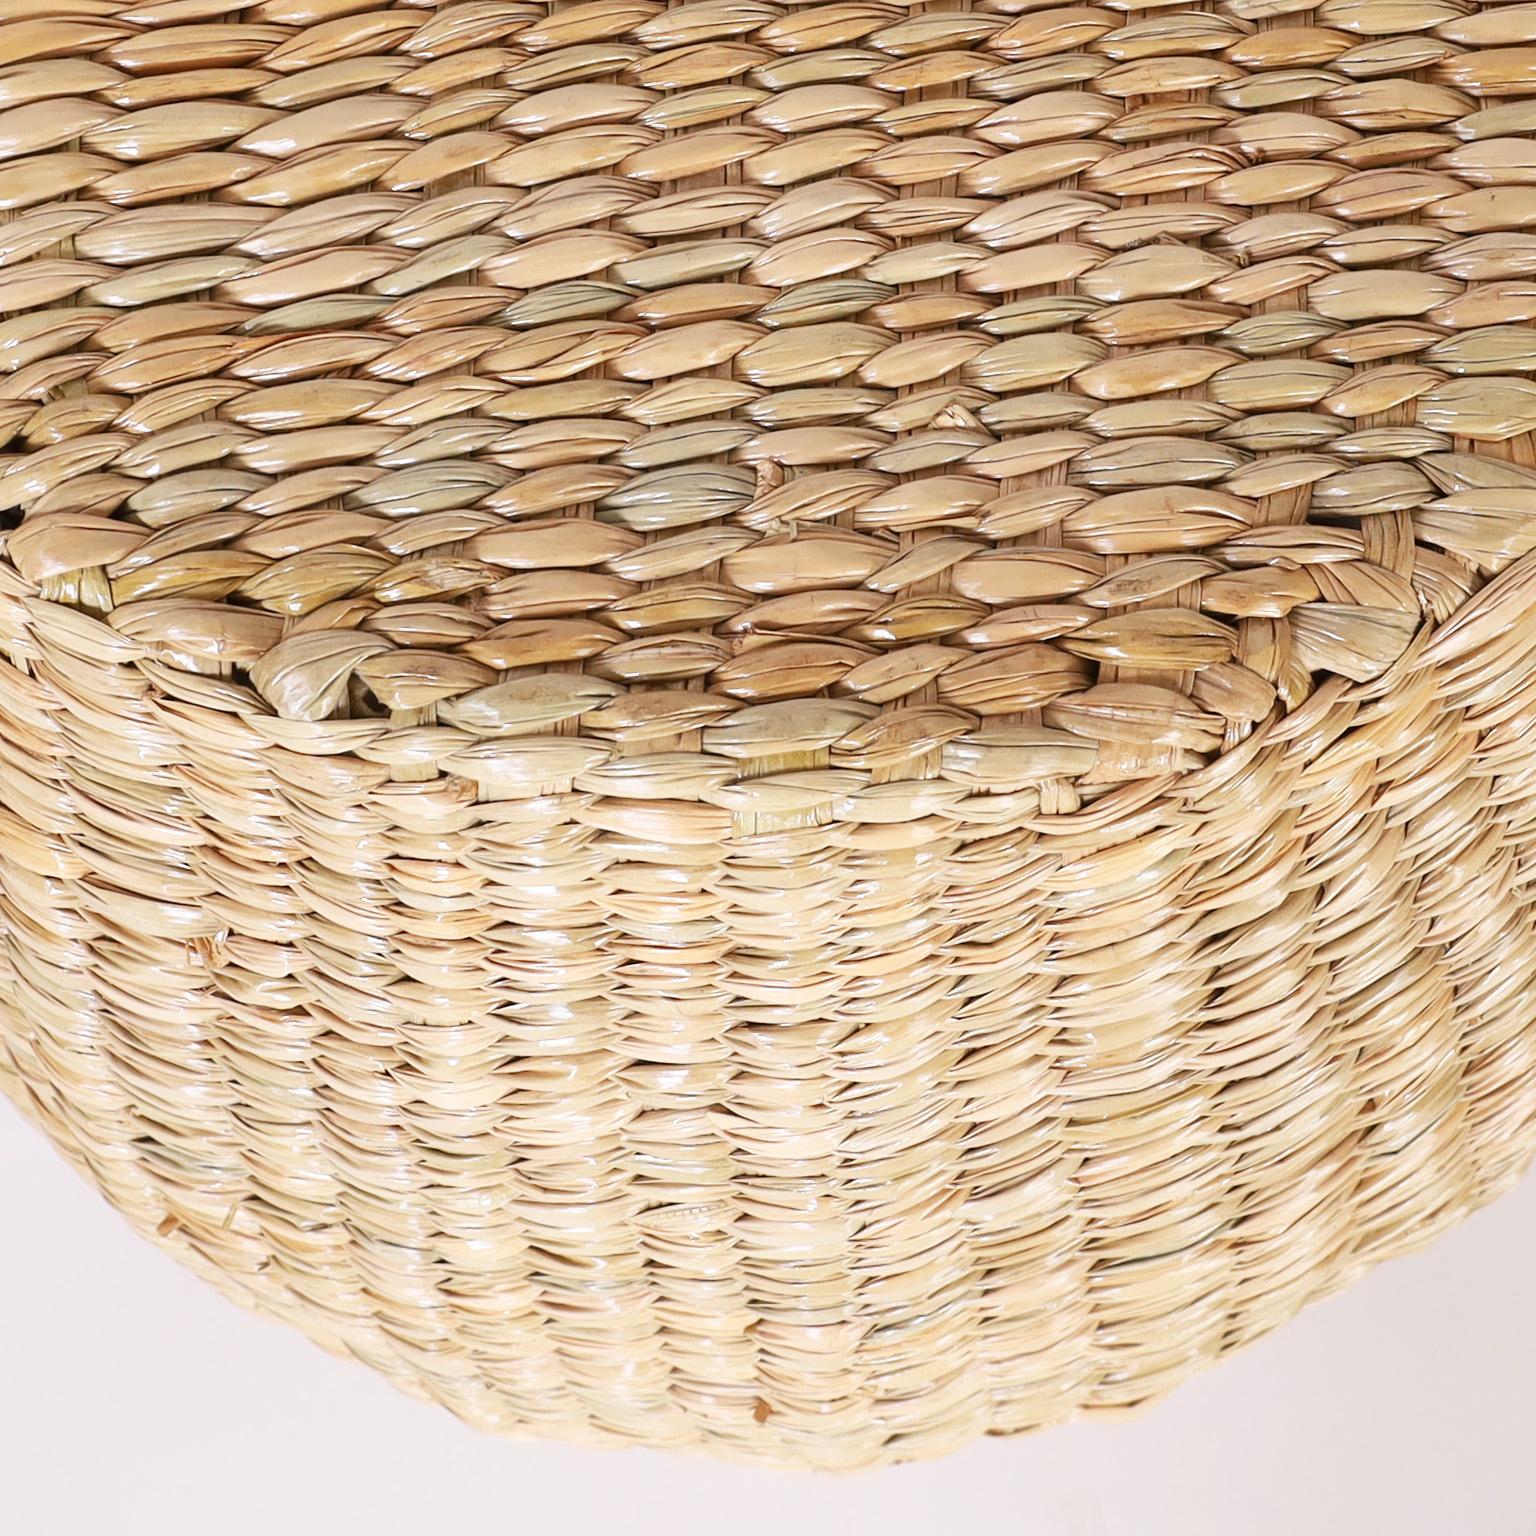 Hand-Woven Pair of Wicker Chuspata Garden Seats from the FS Flores Collection